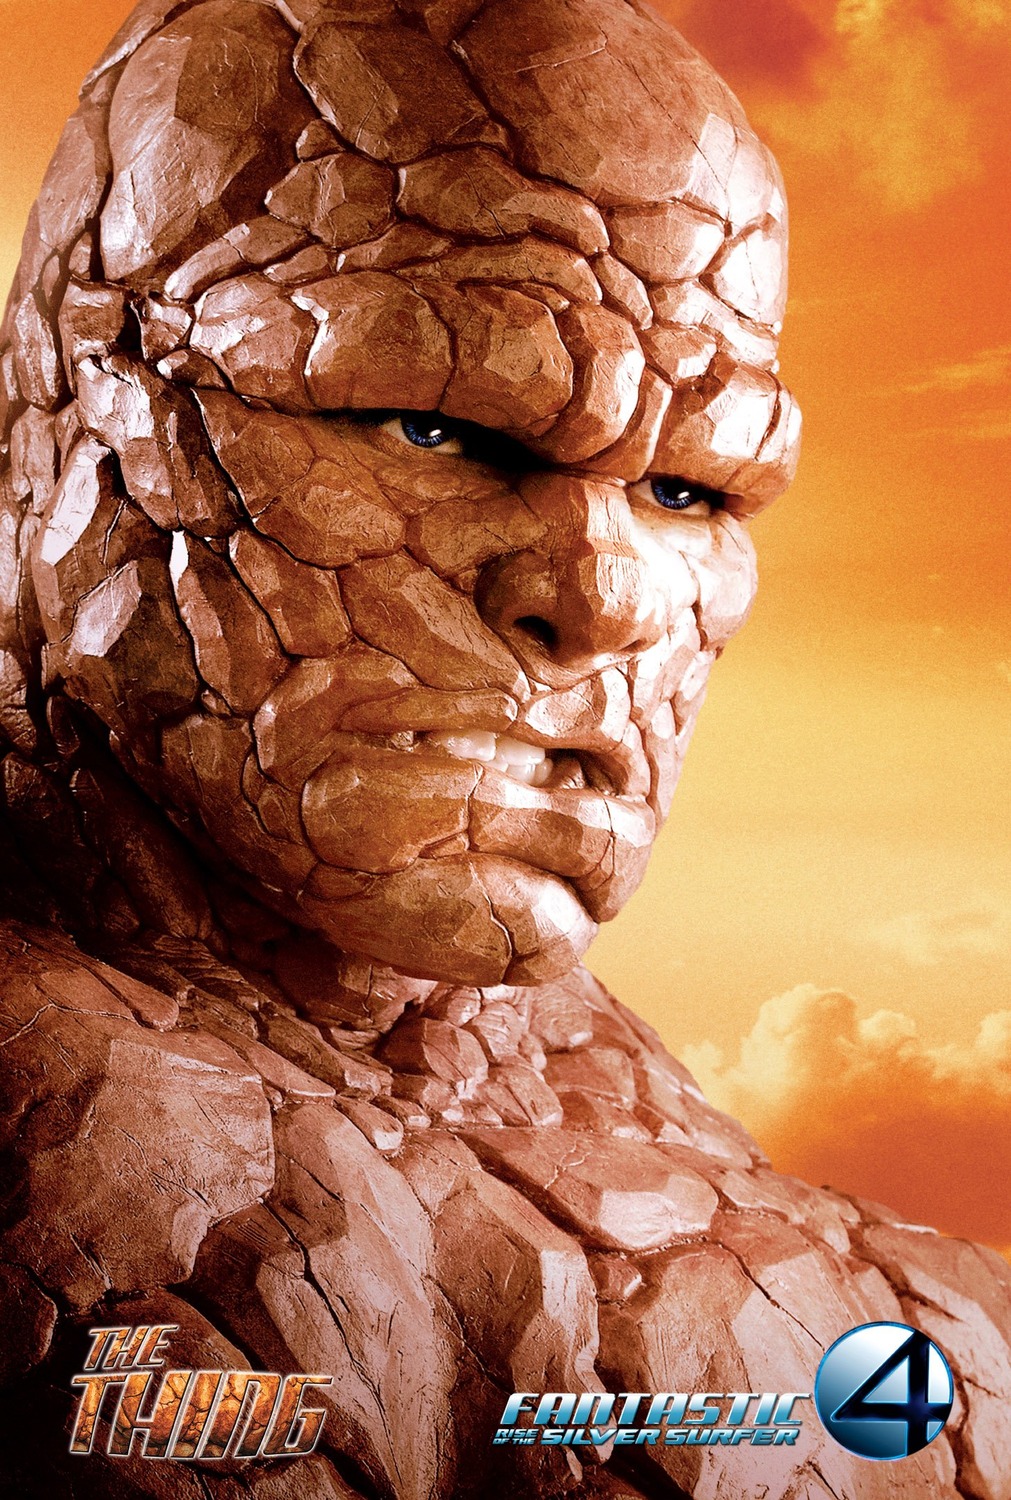 Extra Large Movie Poster Image for Fantastic Four: Rise of the Silver Surfer (#4 of 14)